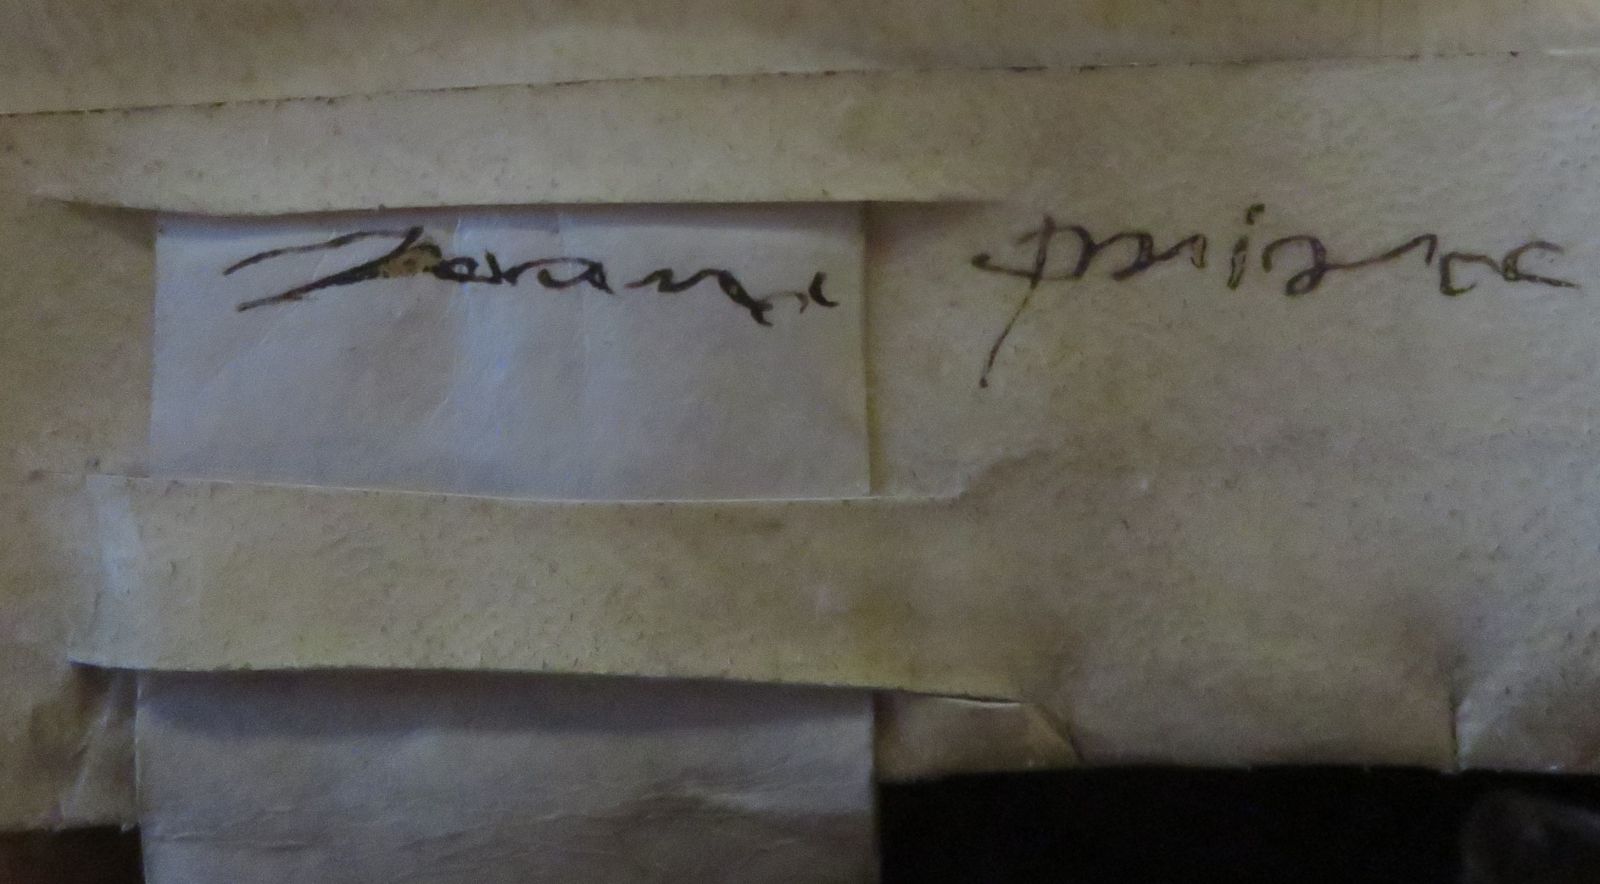 Close up of Jane Price's signature as it appears on the deed